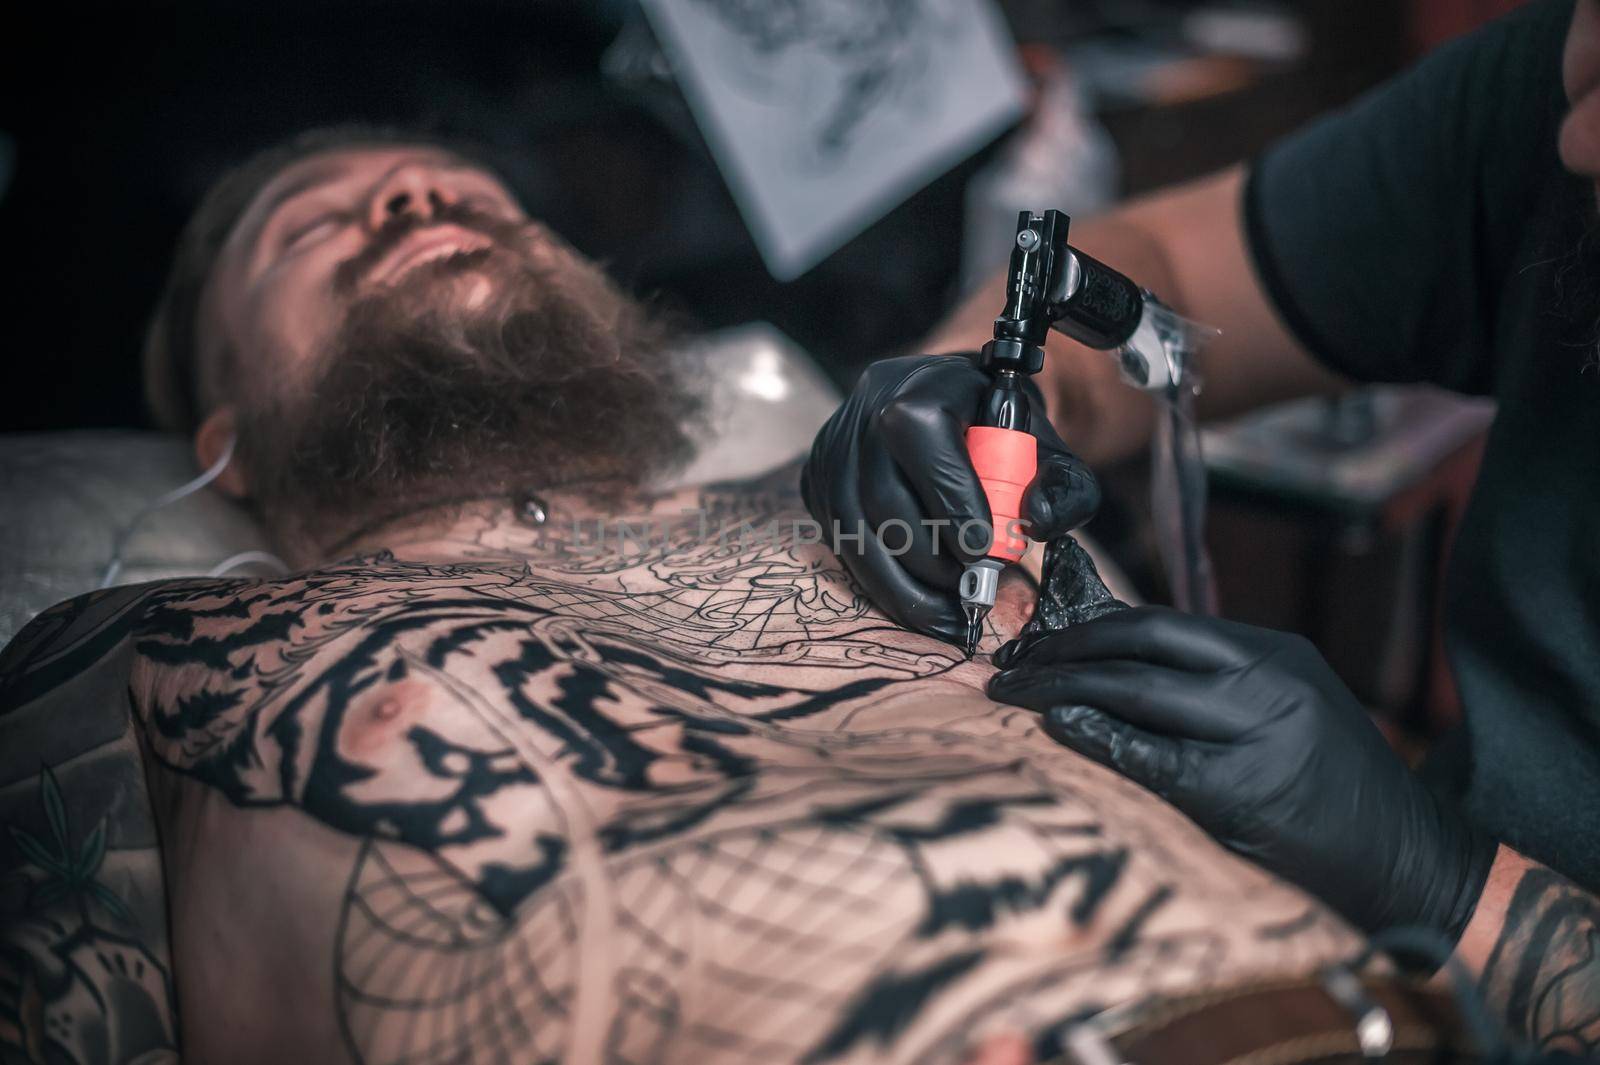 Tattooer makes cool tattoo in the salon by Proff